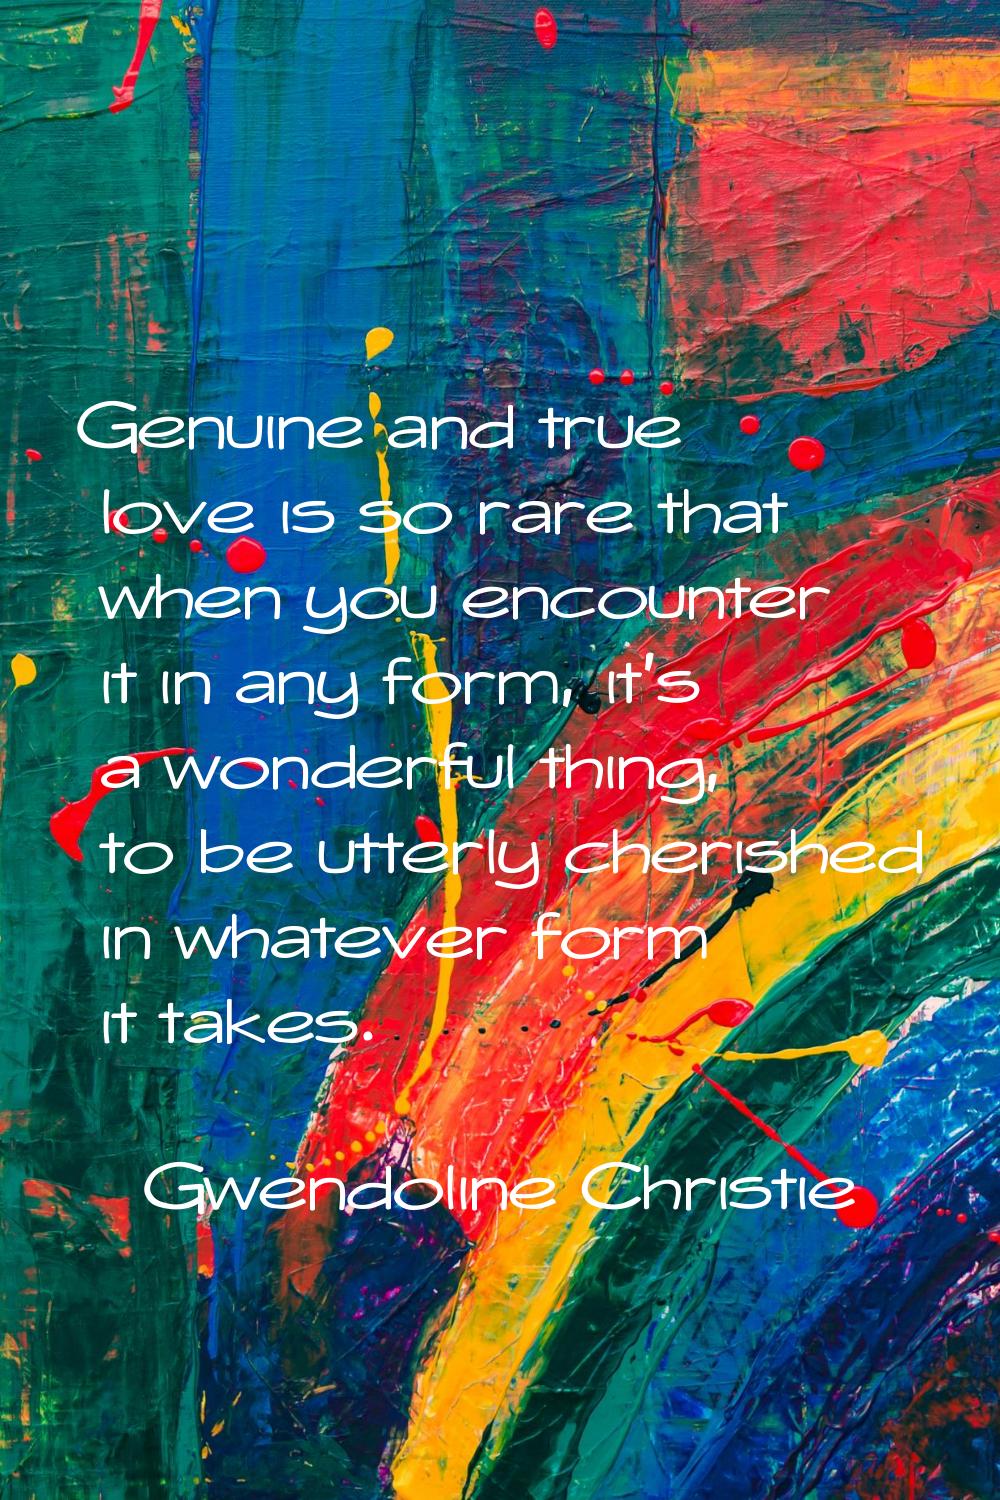 Genuine and true love is so rare that when you encounter it in any form, it's a wonderful thing, to